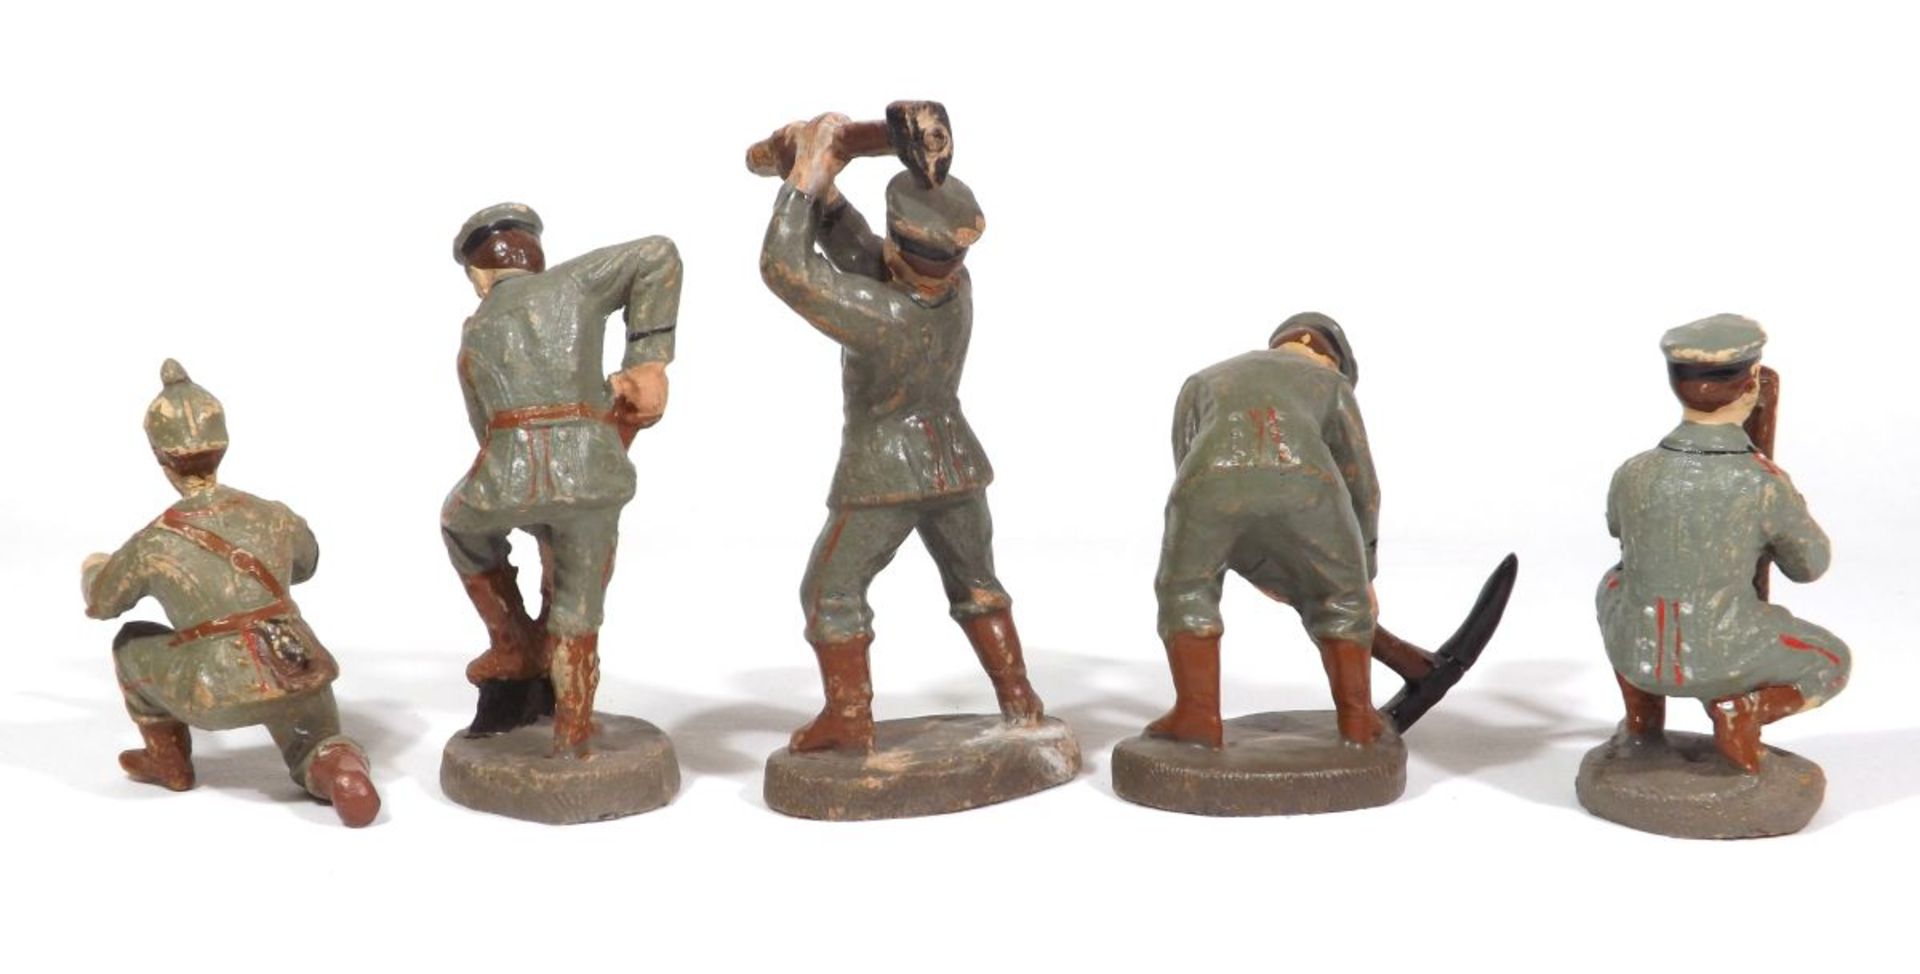 German military, Elastolin or Lineol or others, composition figures, big size, made in Germany befor - Bild 2 aus 2